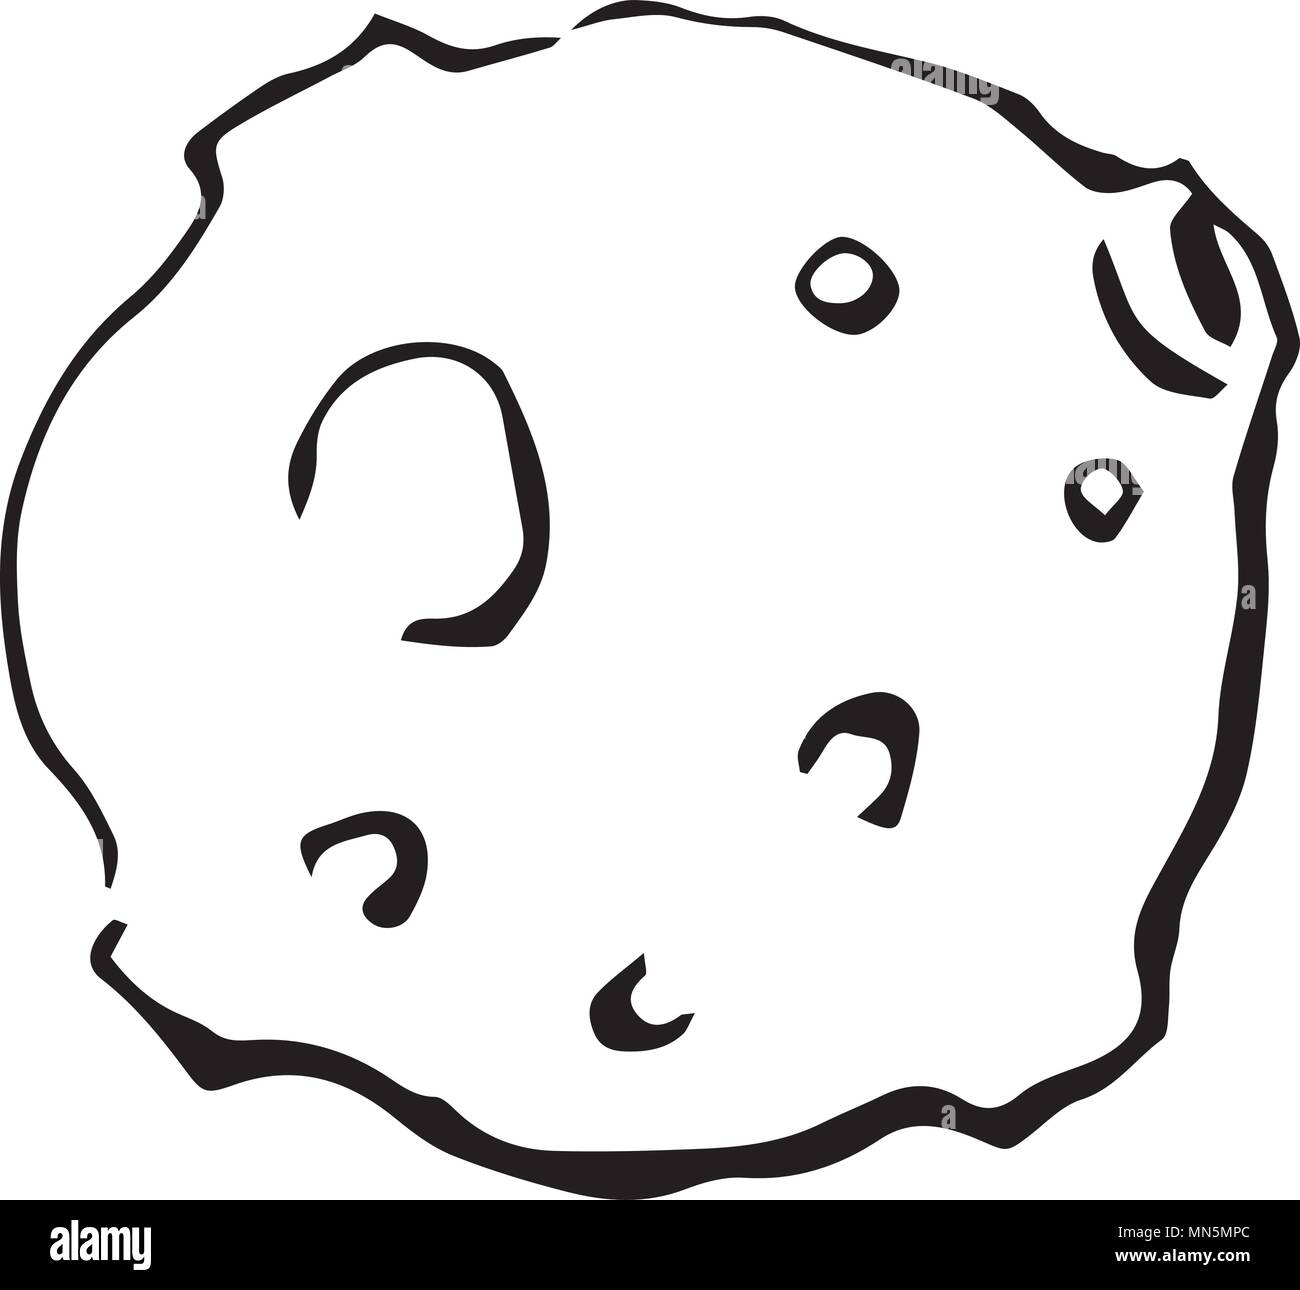 Black and white asteroid drawing. Vector graphic. Stock Vector